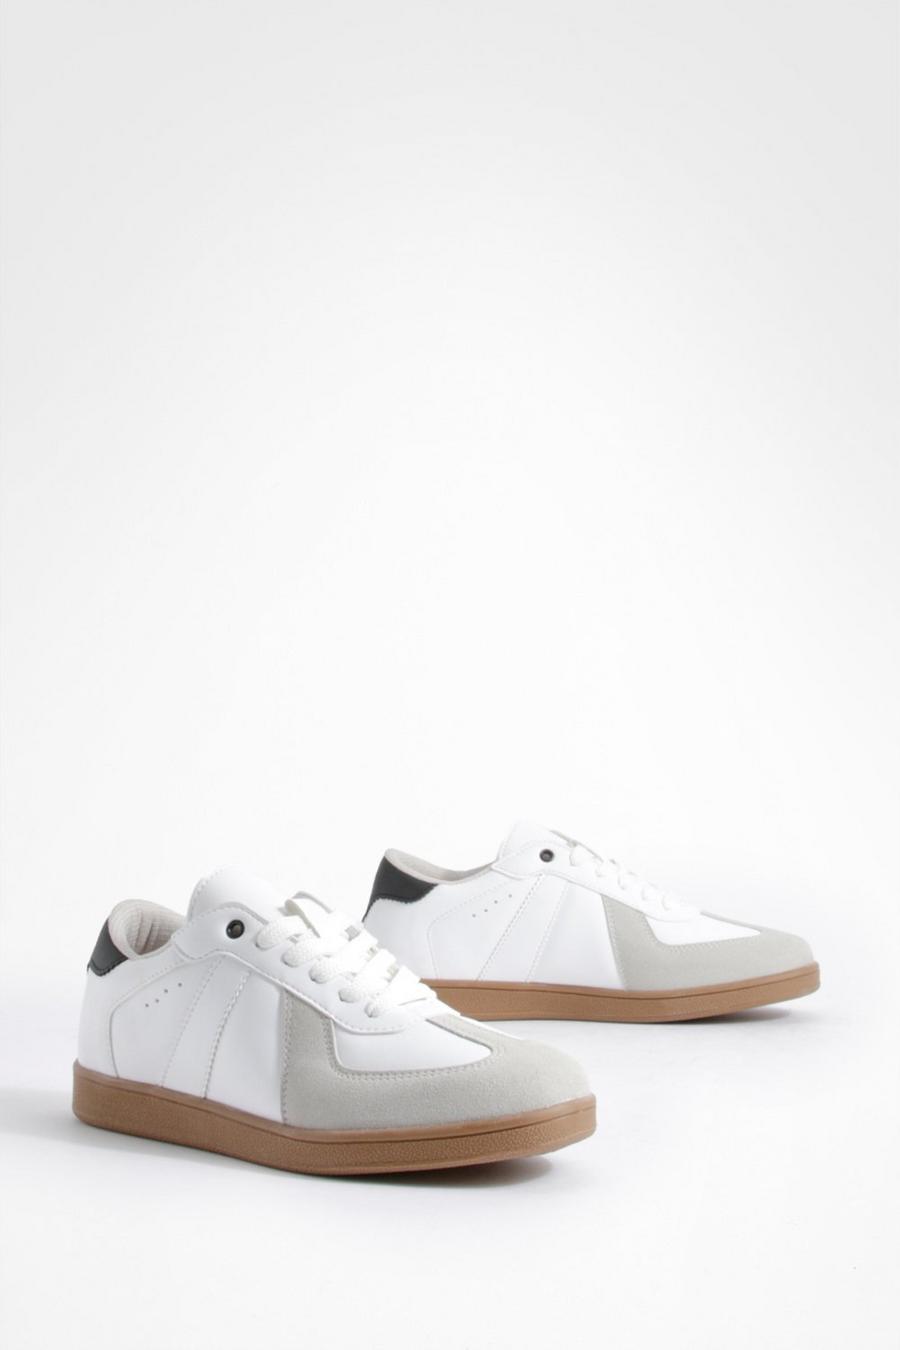 White Contrast Panel Gum Sole Flat Sneakers